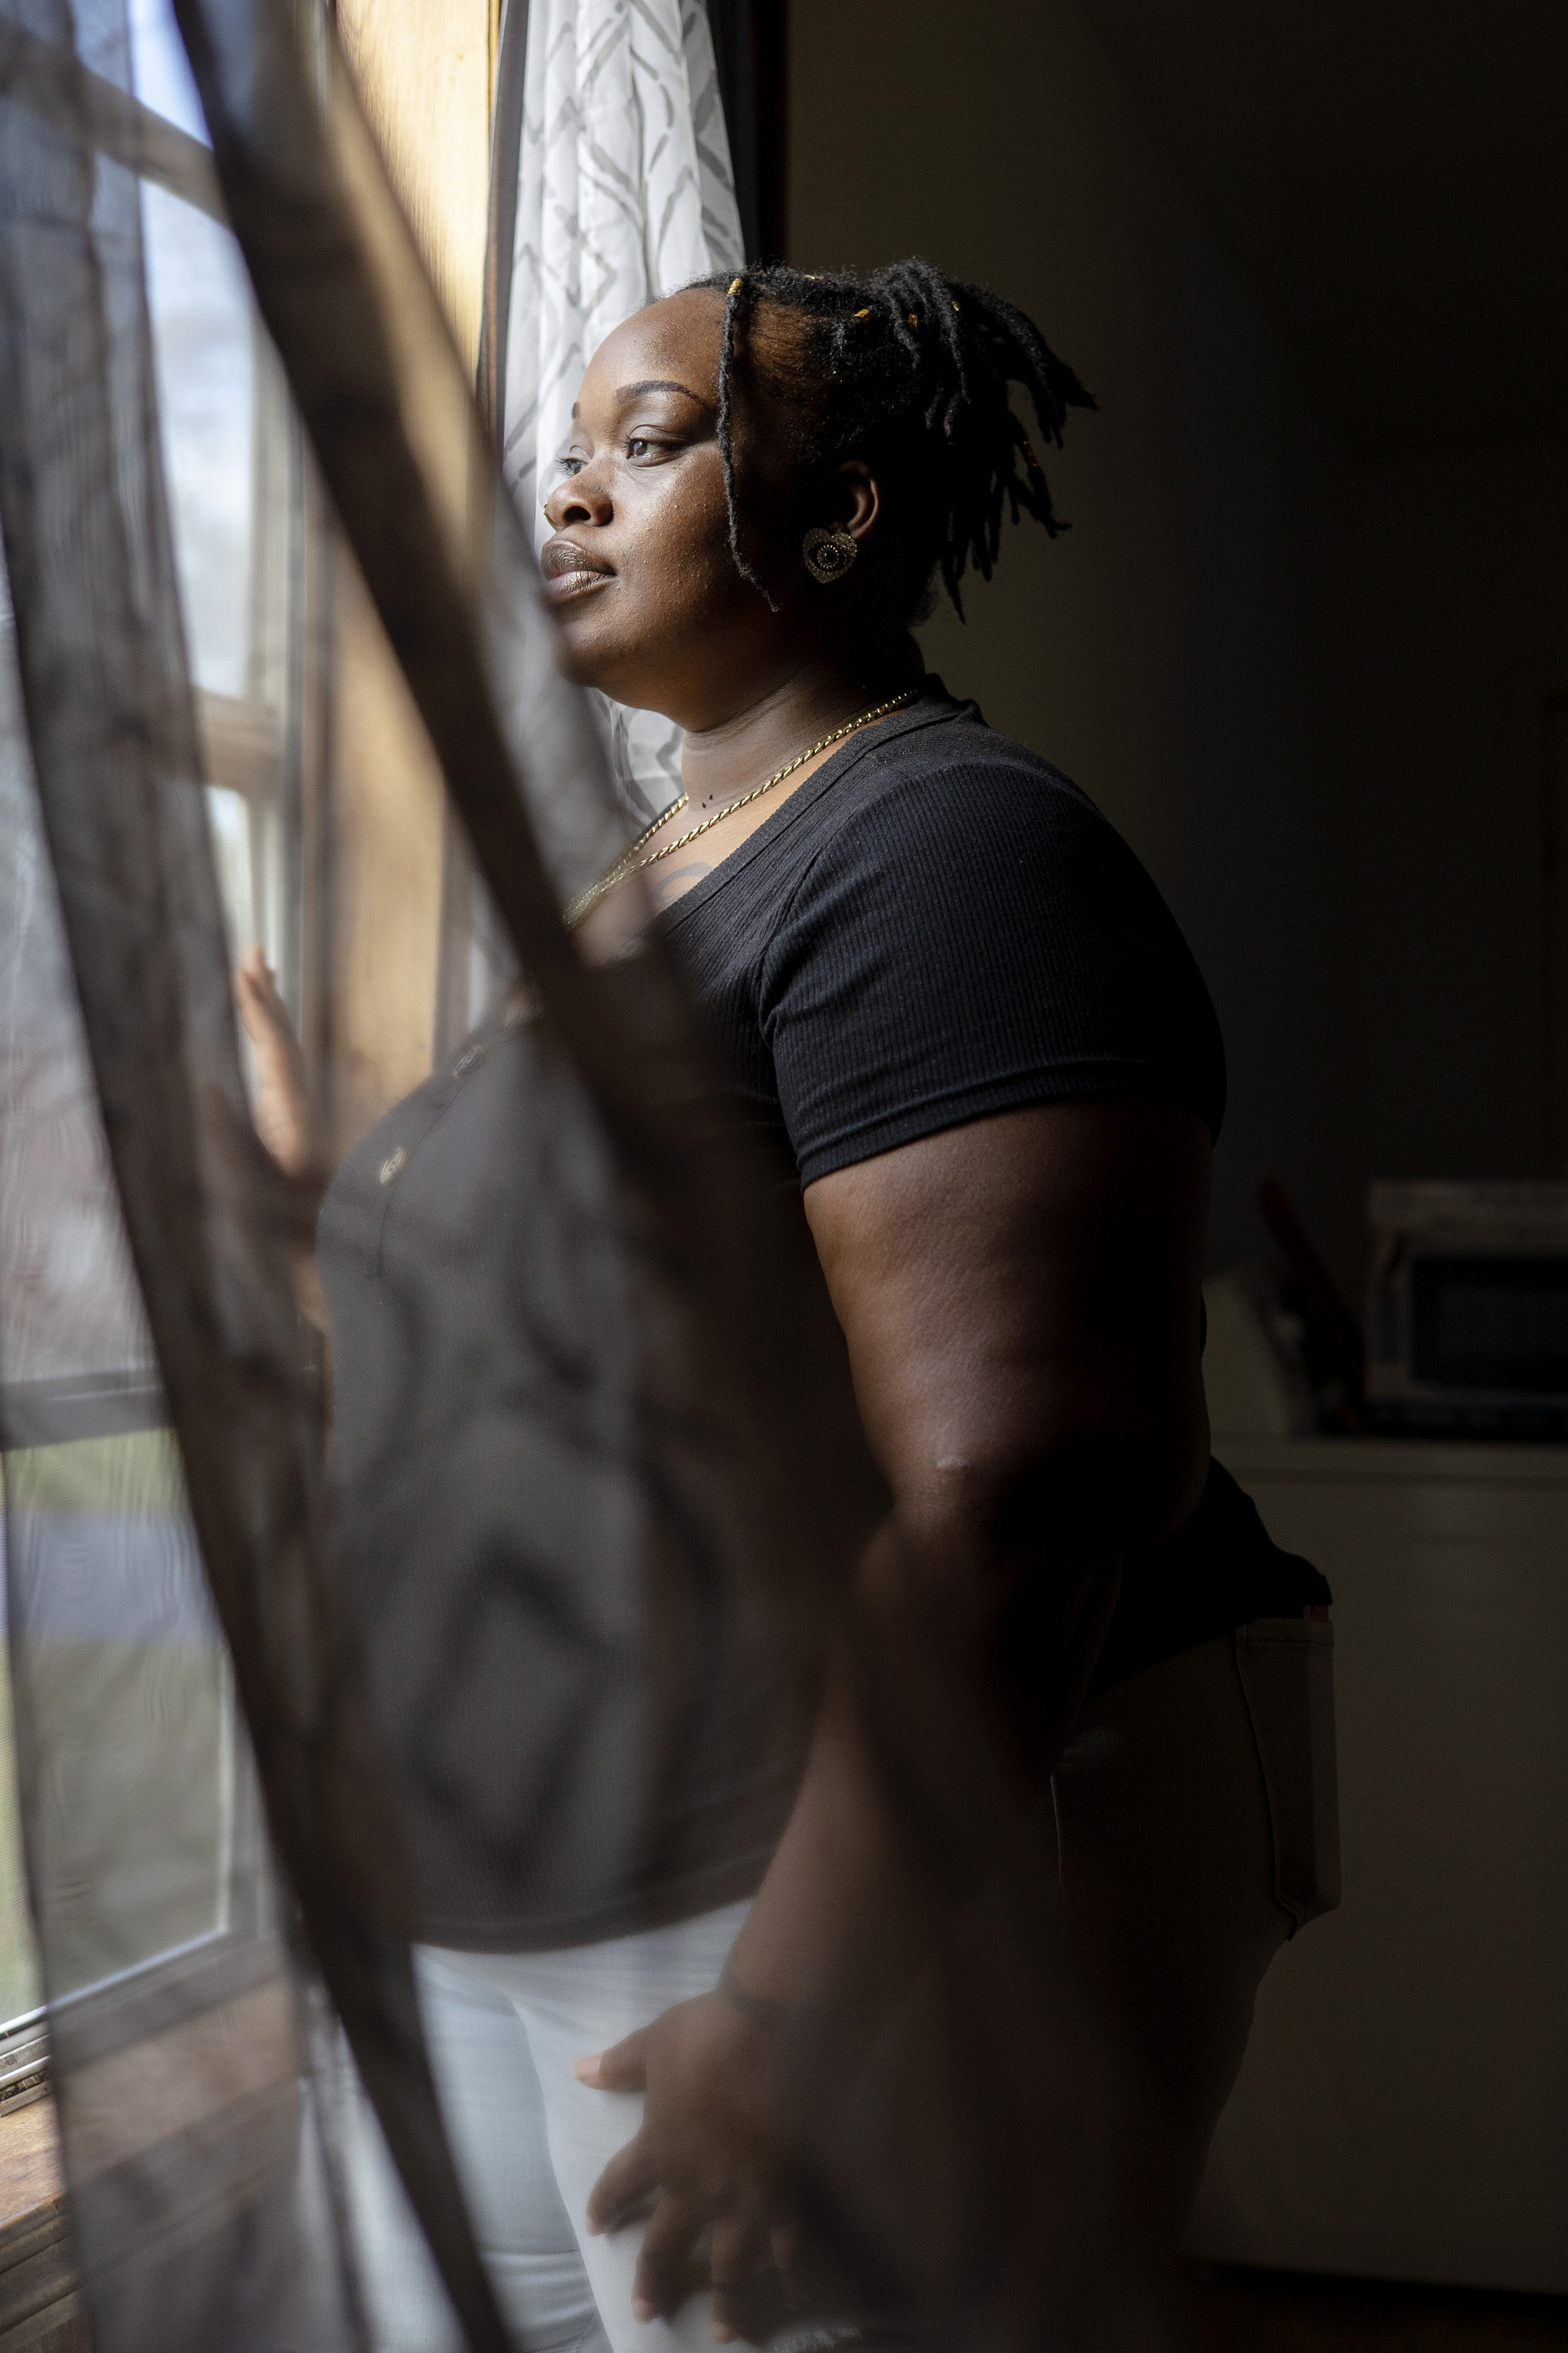 O'laysha Davis looks out a window in her home. A sheer curtain blows in the wind in front of her figure.